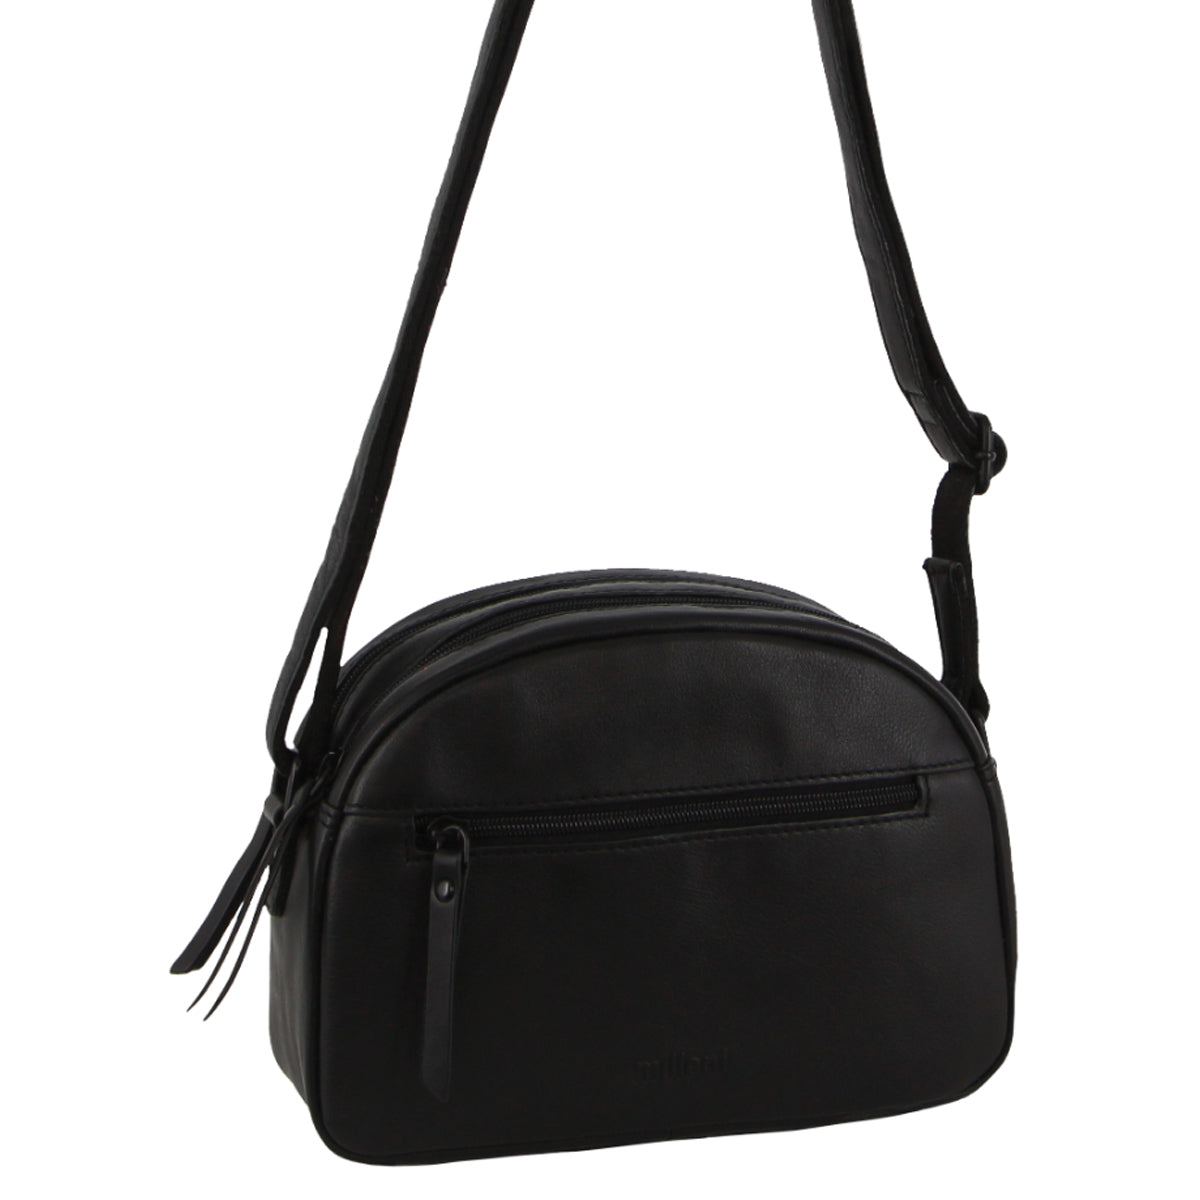 Milleni - NL3869 Small rounded leather sidebag - Black-3